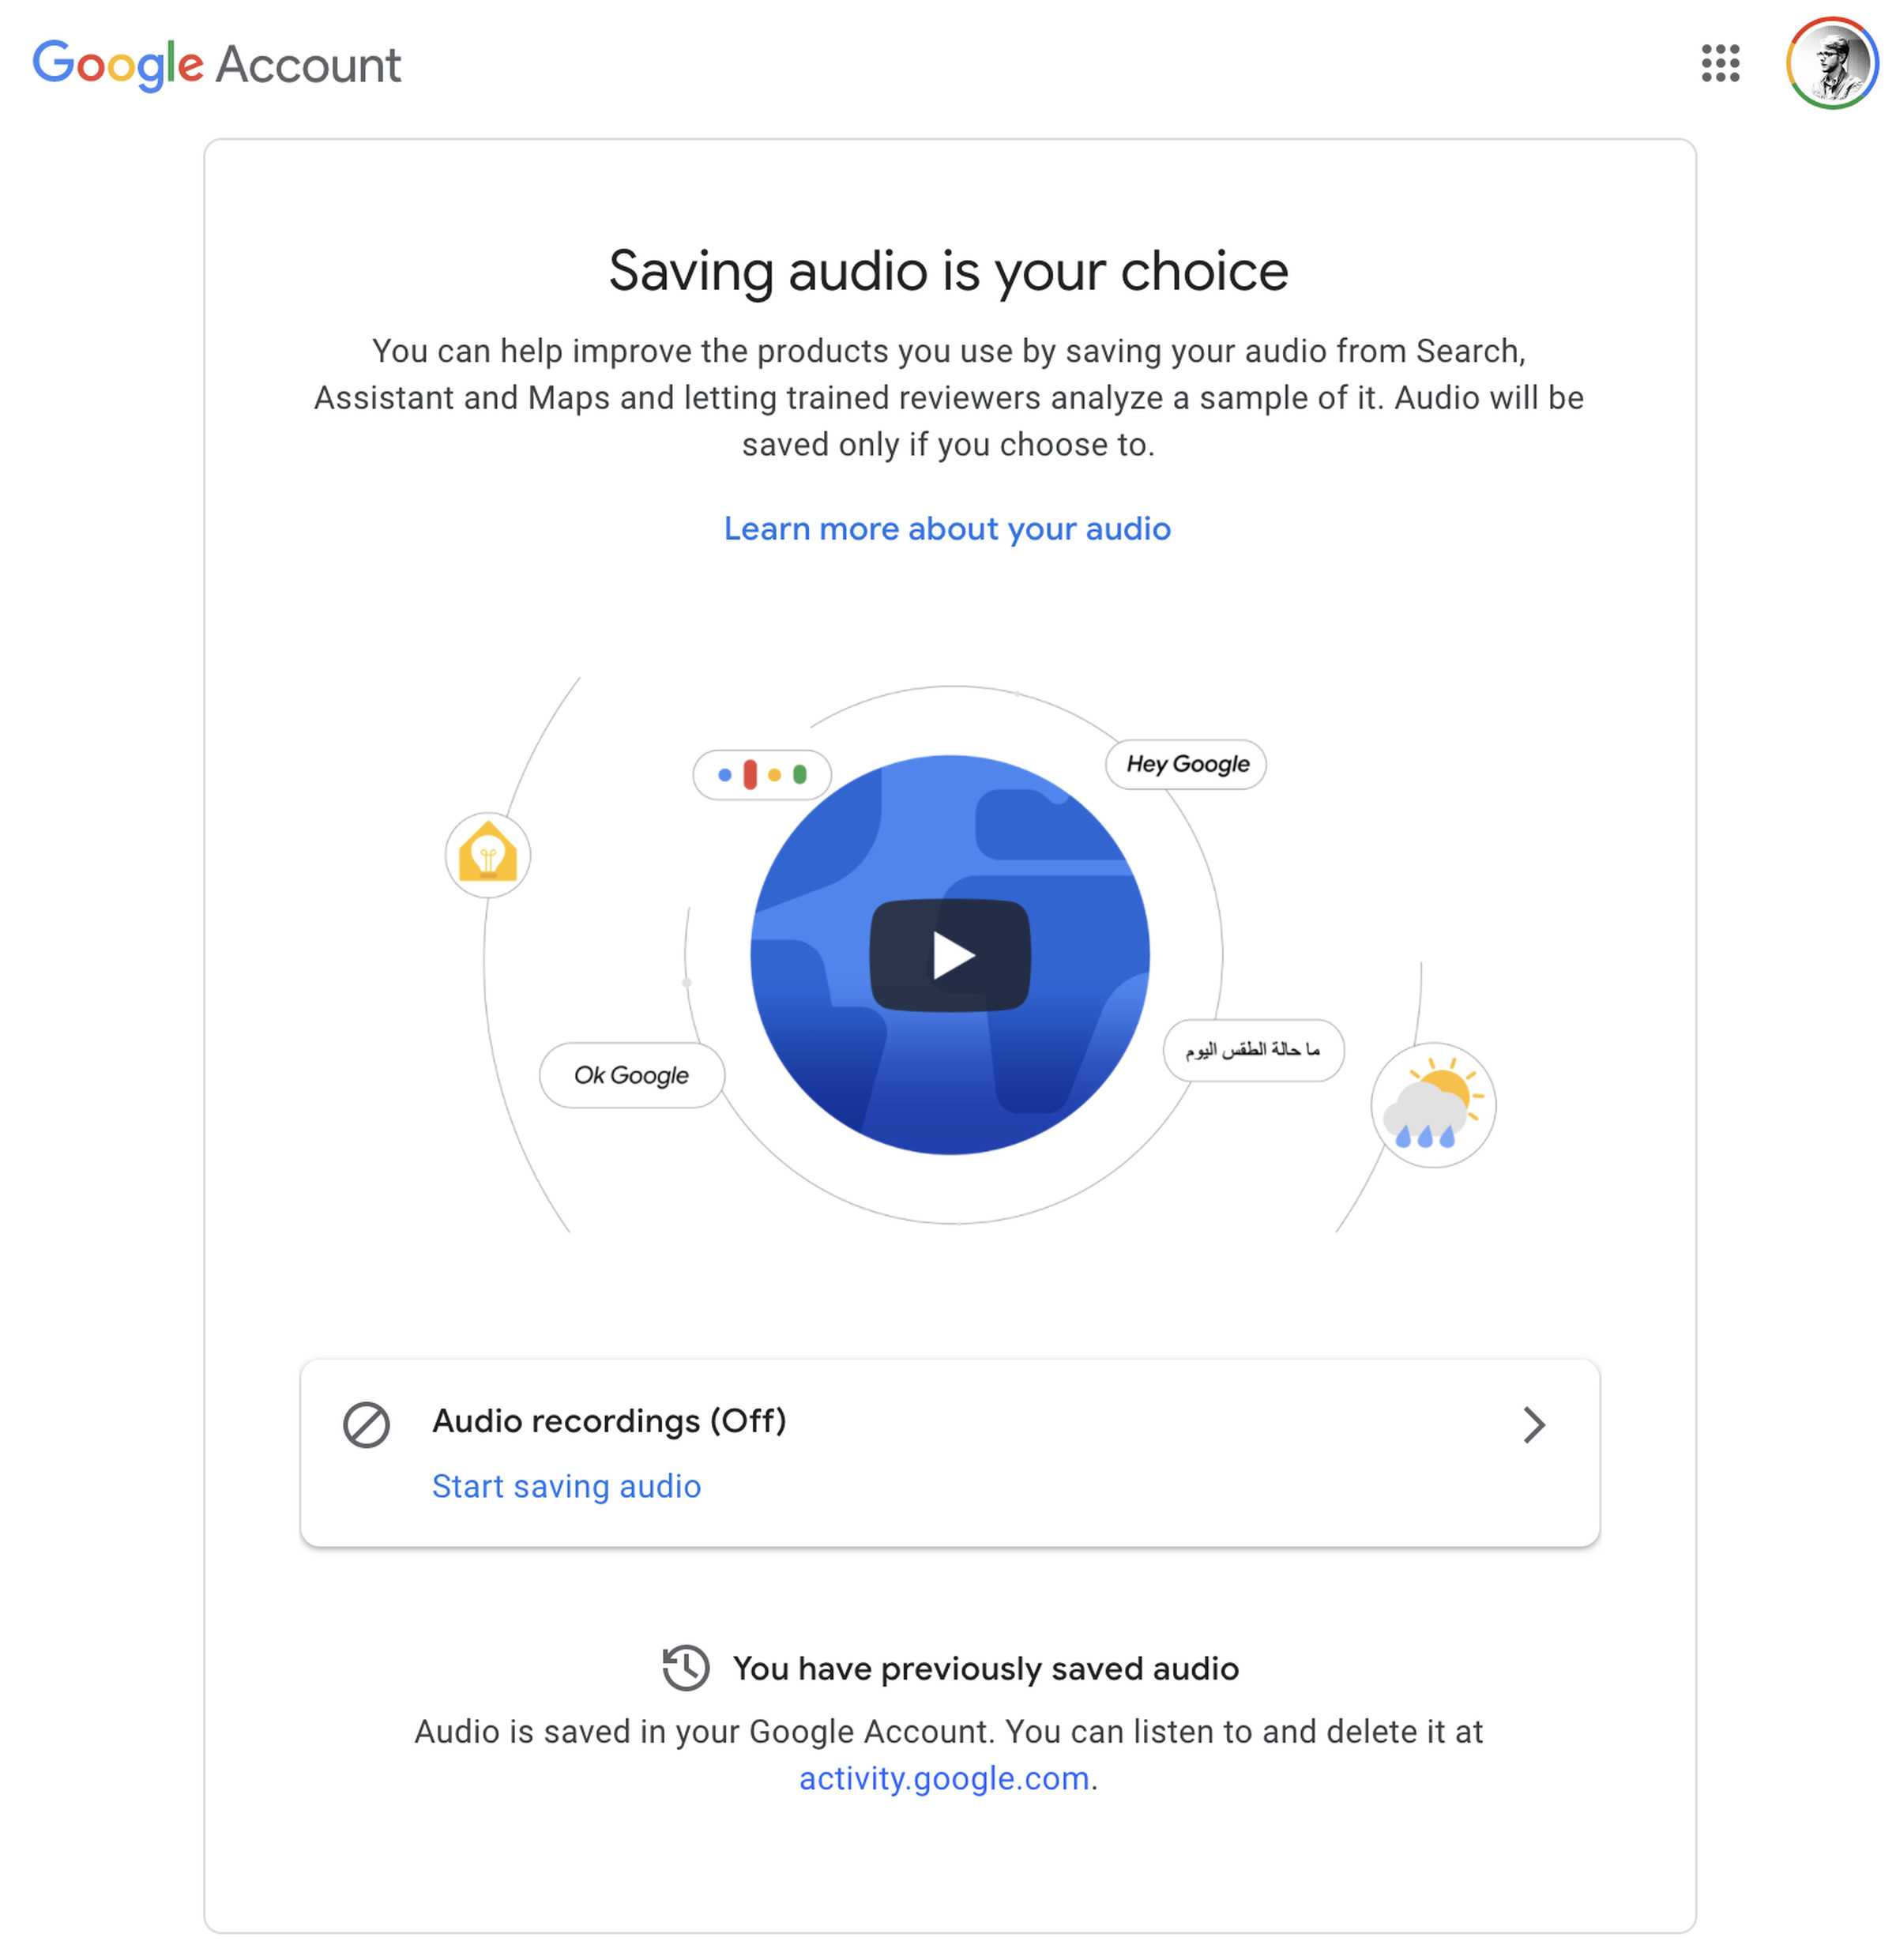 Google’s website for opting back in to having audio recordings saved